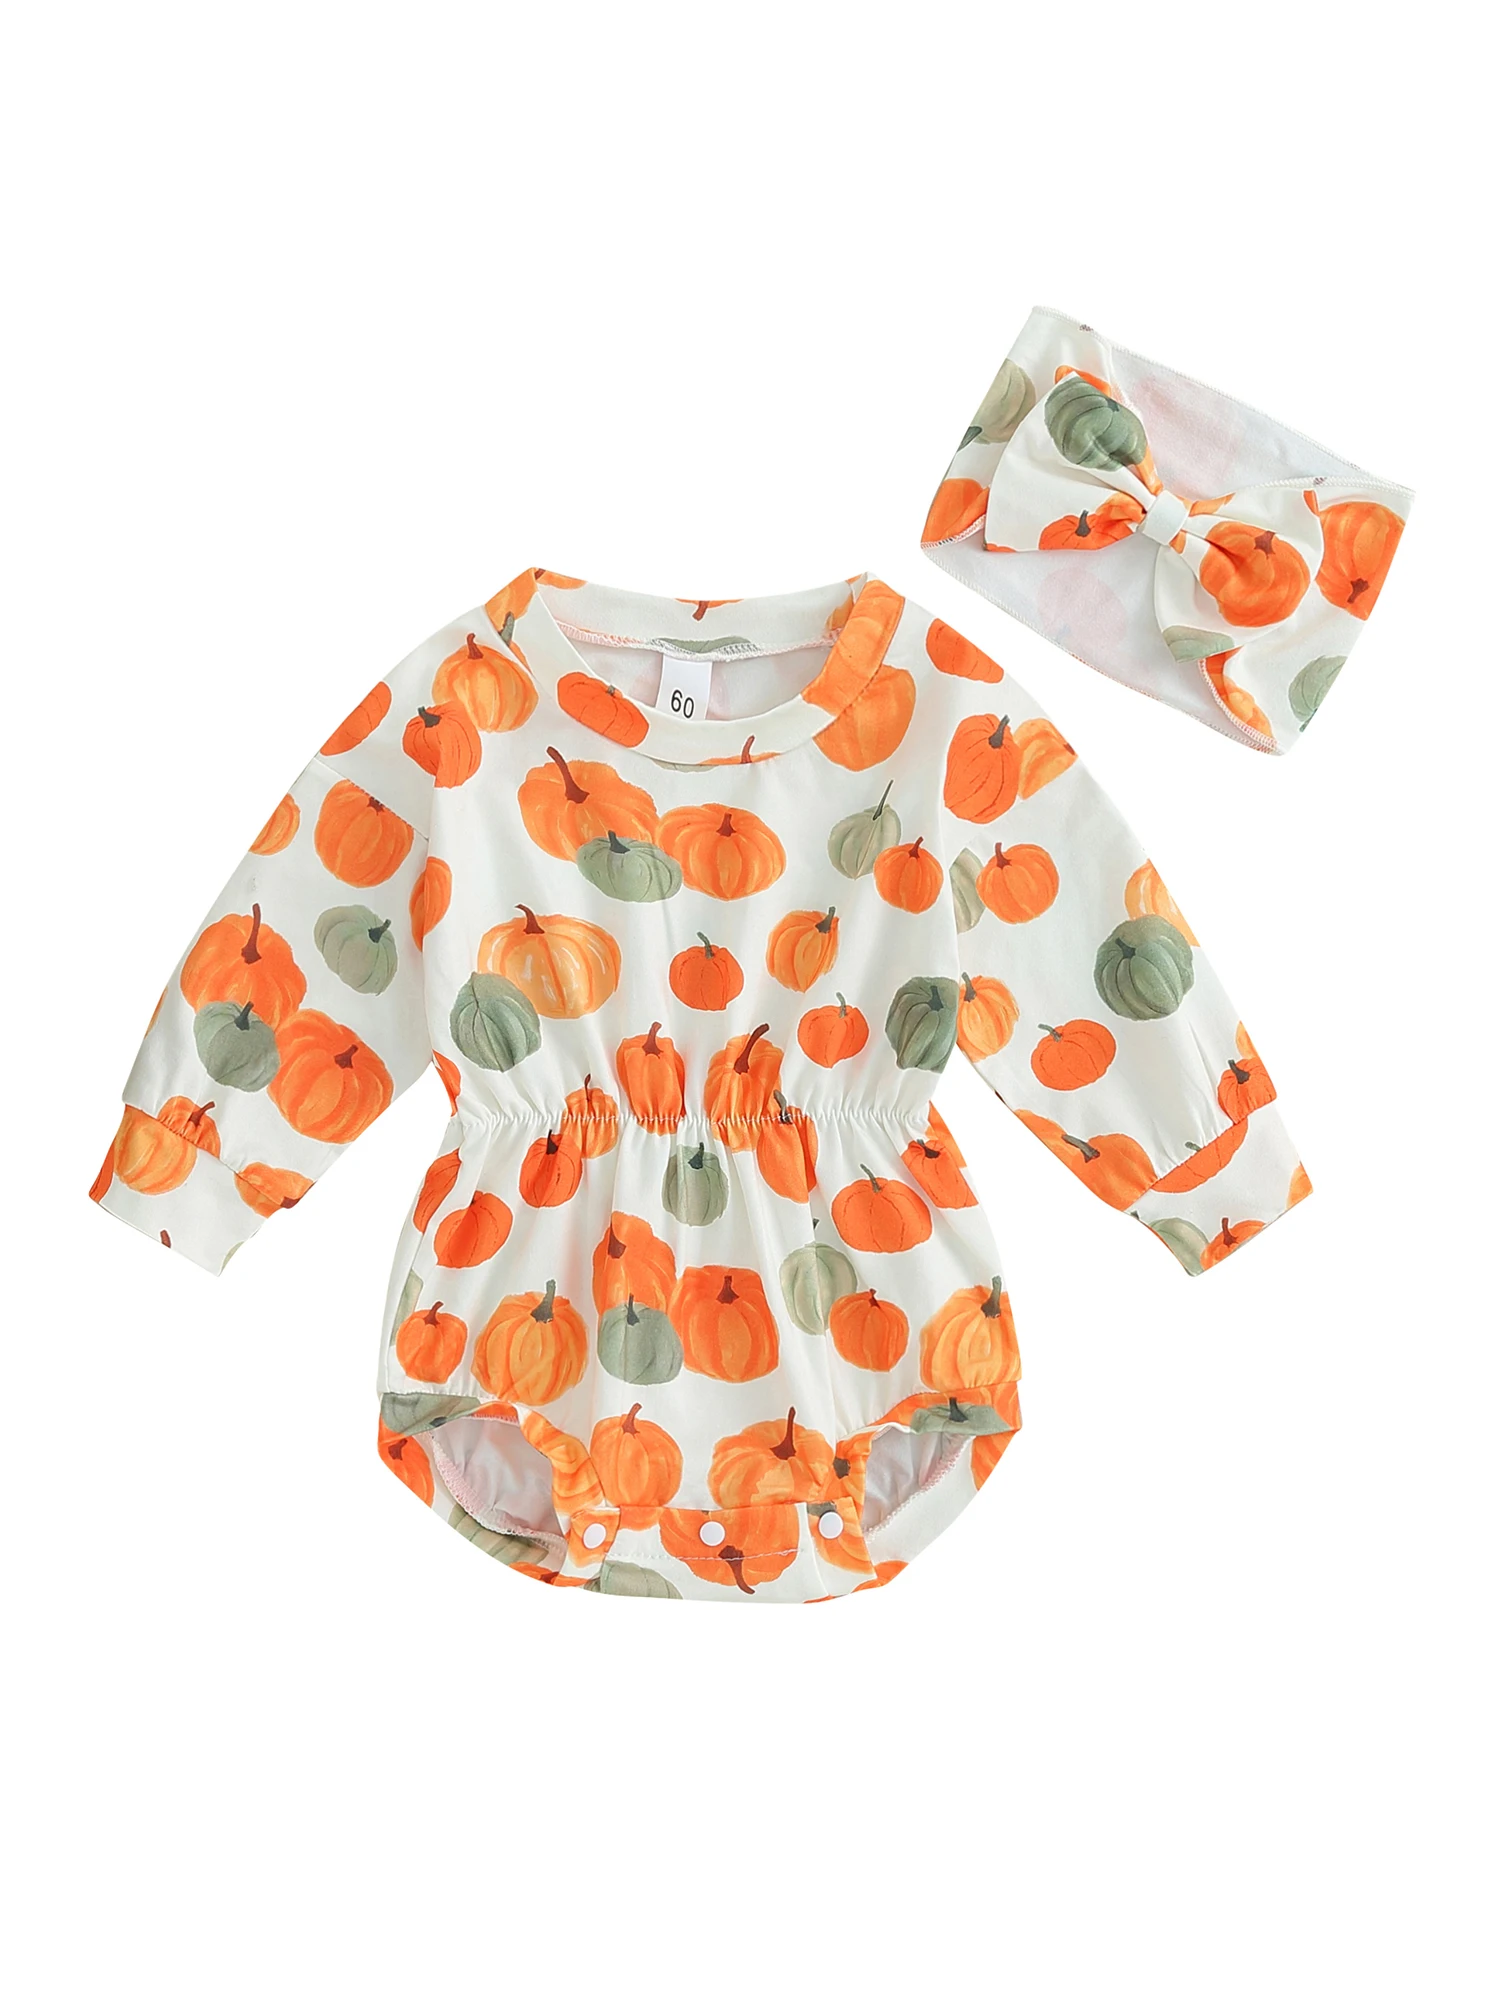 

Baby Girl Halloween Costume Adorable Pumpkin Print Romper with Matching Hairband Long Sleeve Crew Neck Outfit